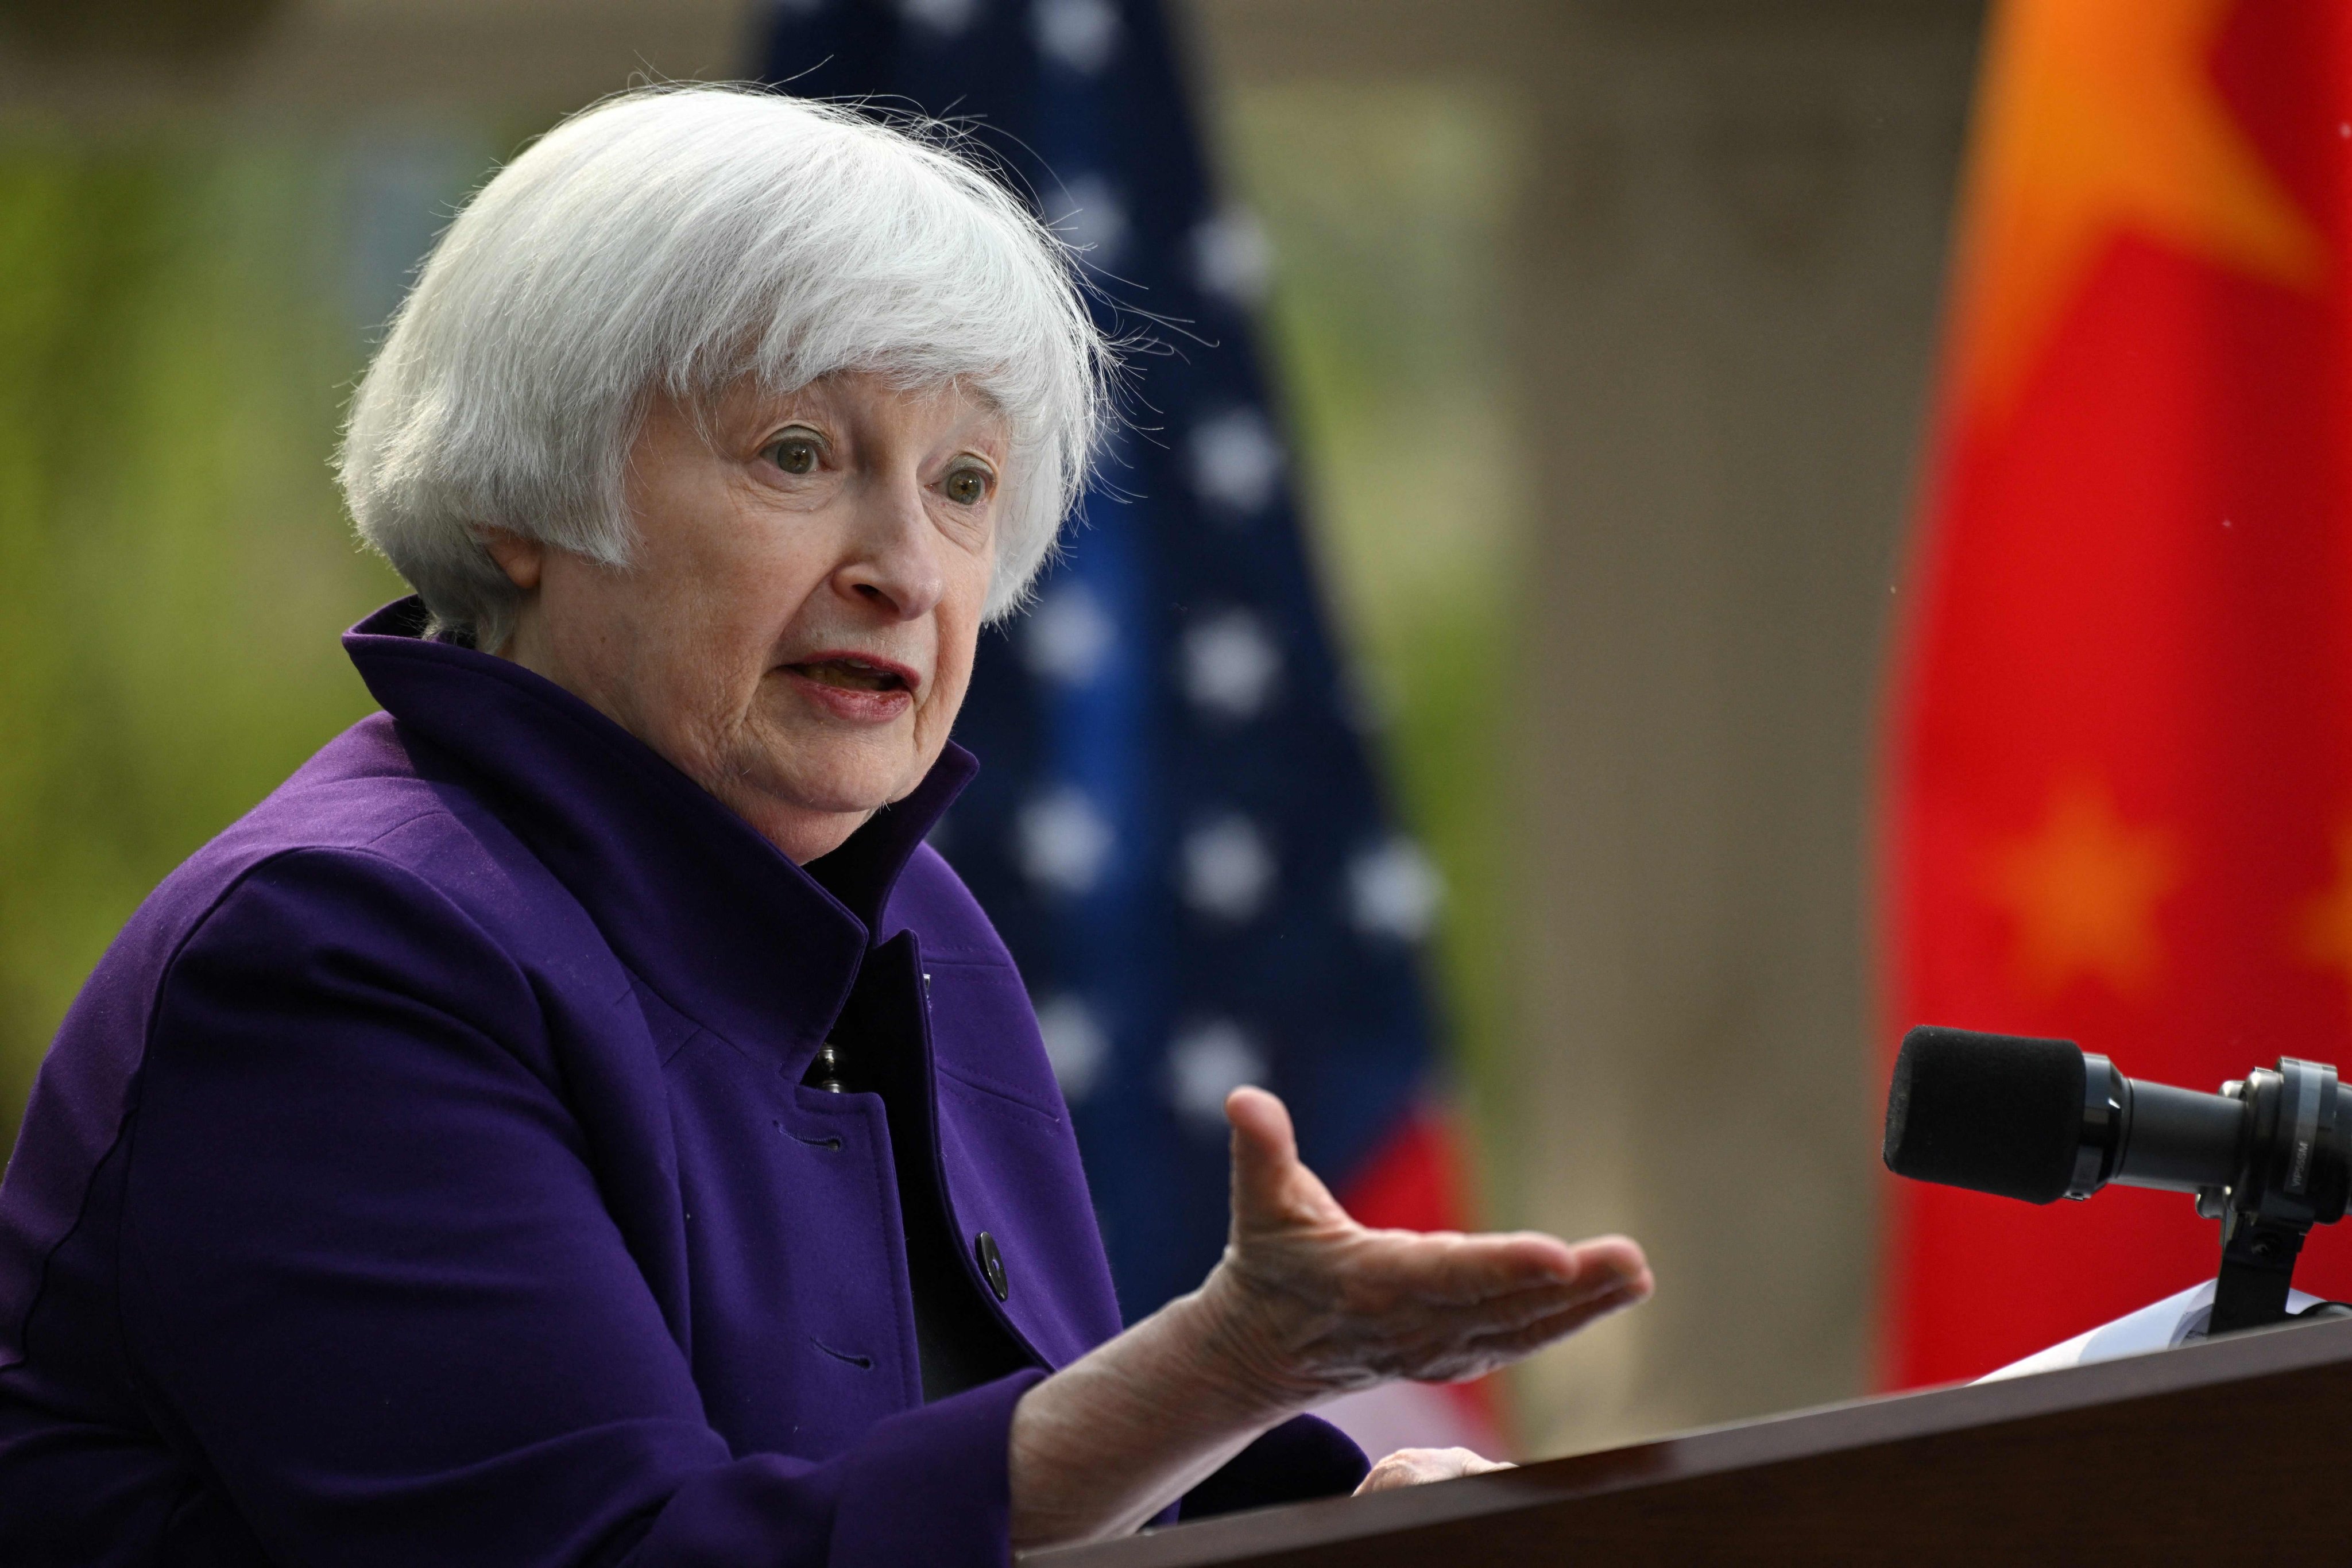 US Treasury Secretary Janet Yellen speaks at a press conference in Beijing on April 8 during her week-long visit to China,. Photo: AFP